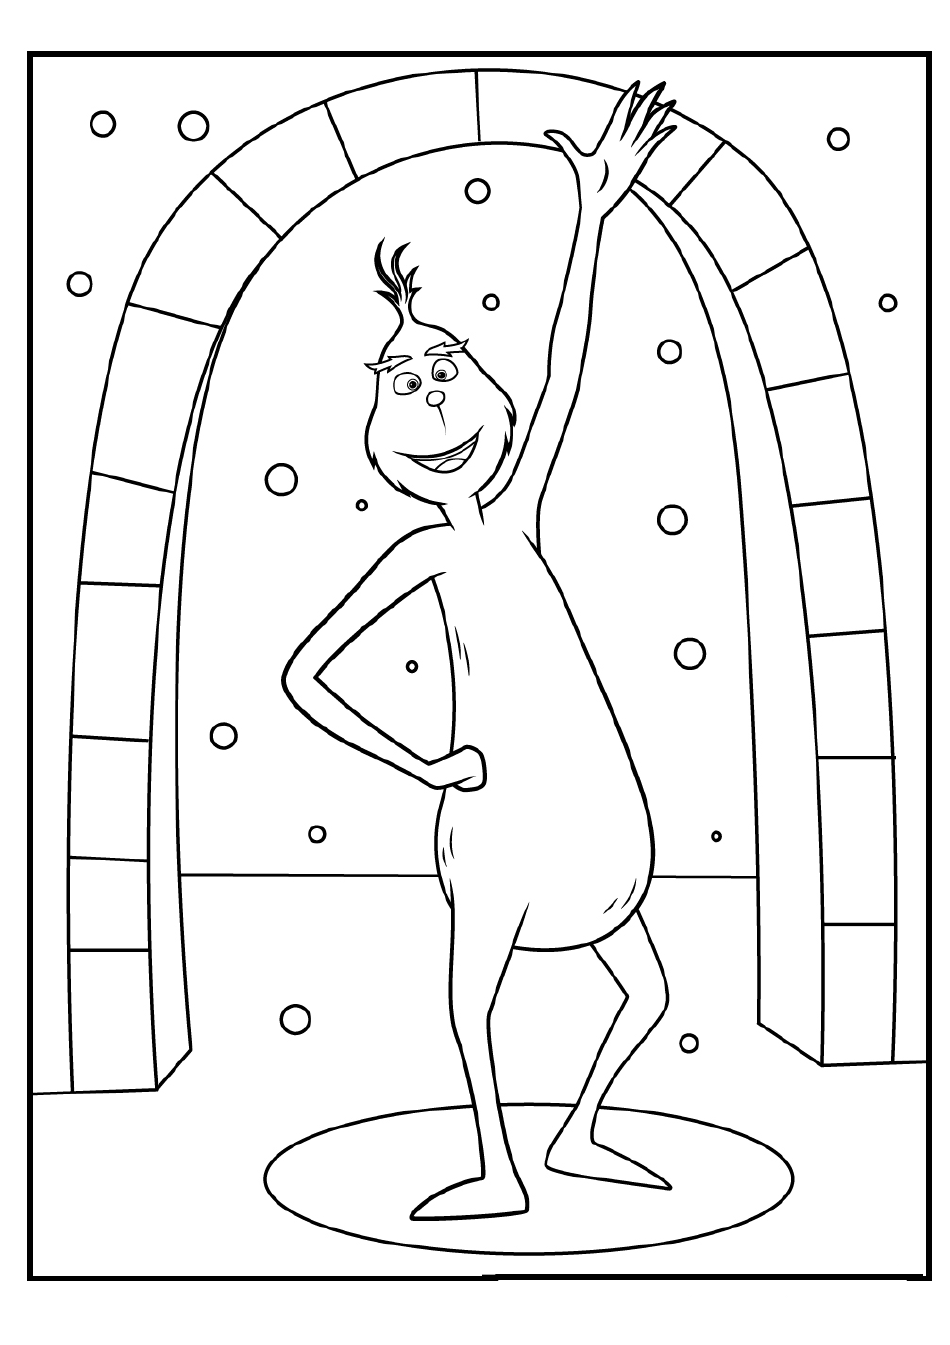 Grinch coloring pages featuring the mischievous Grinch character engaging in festive activities.